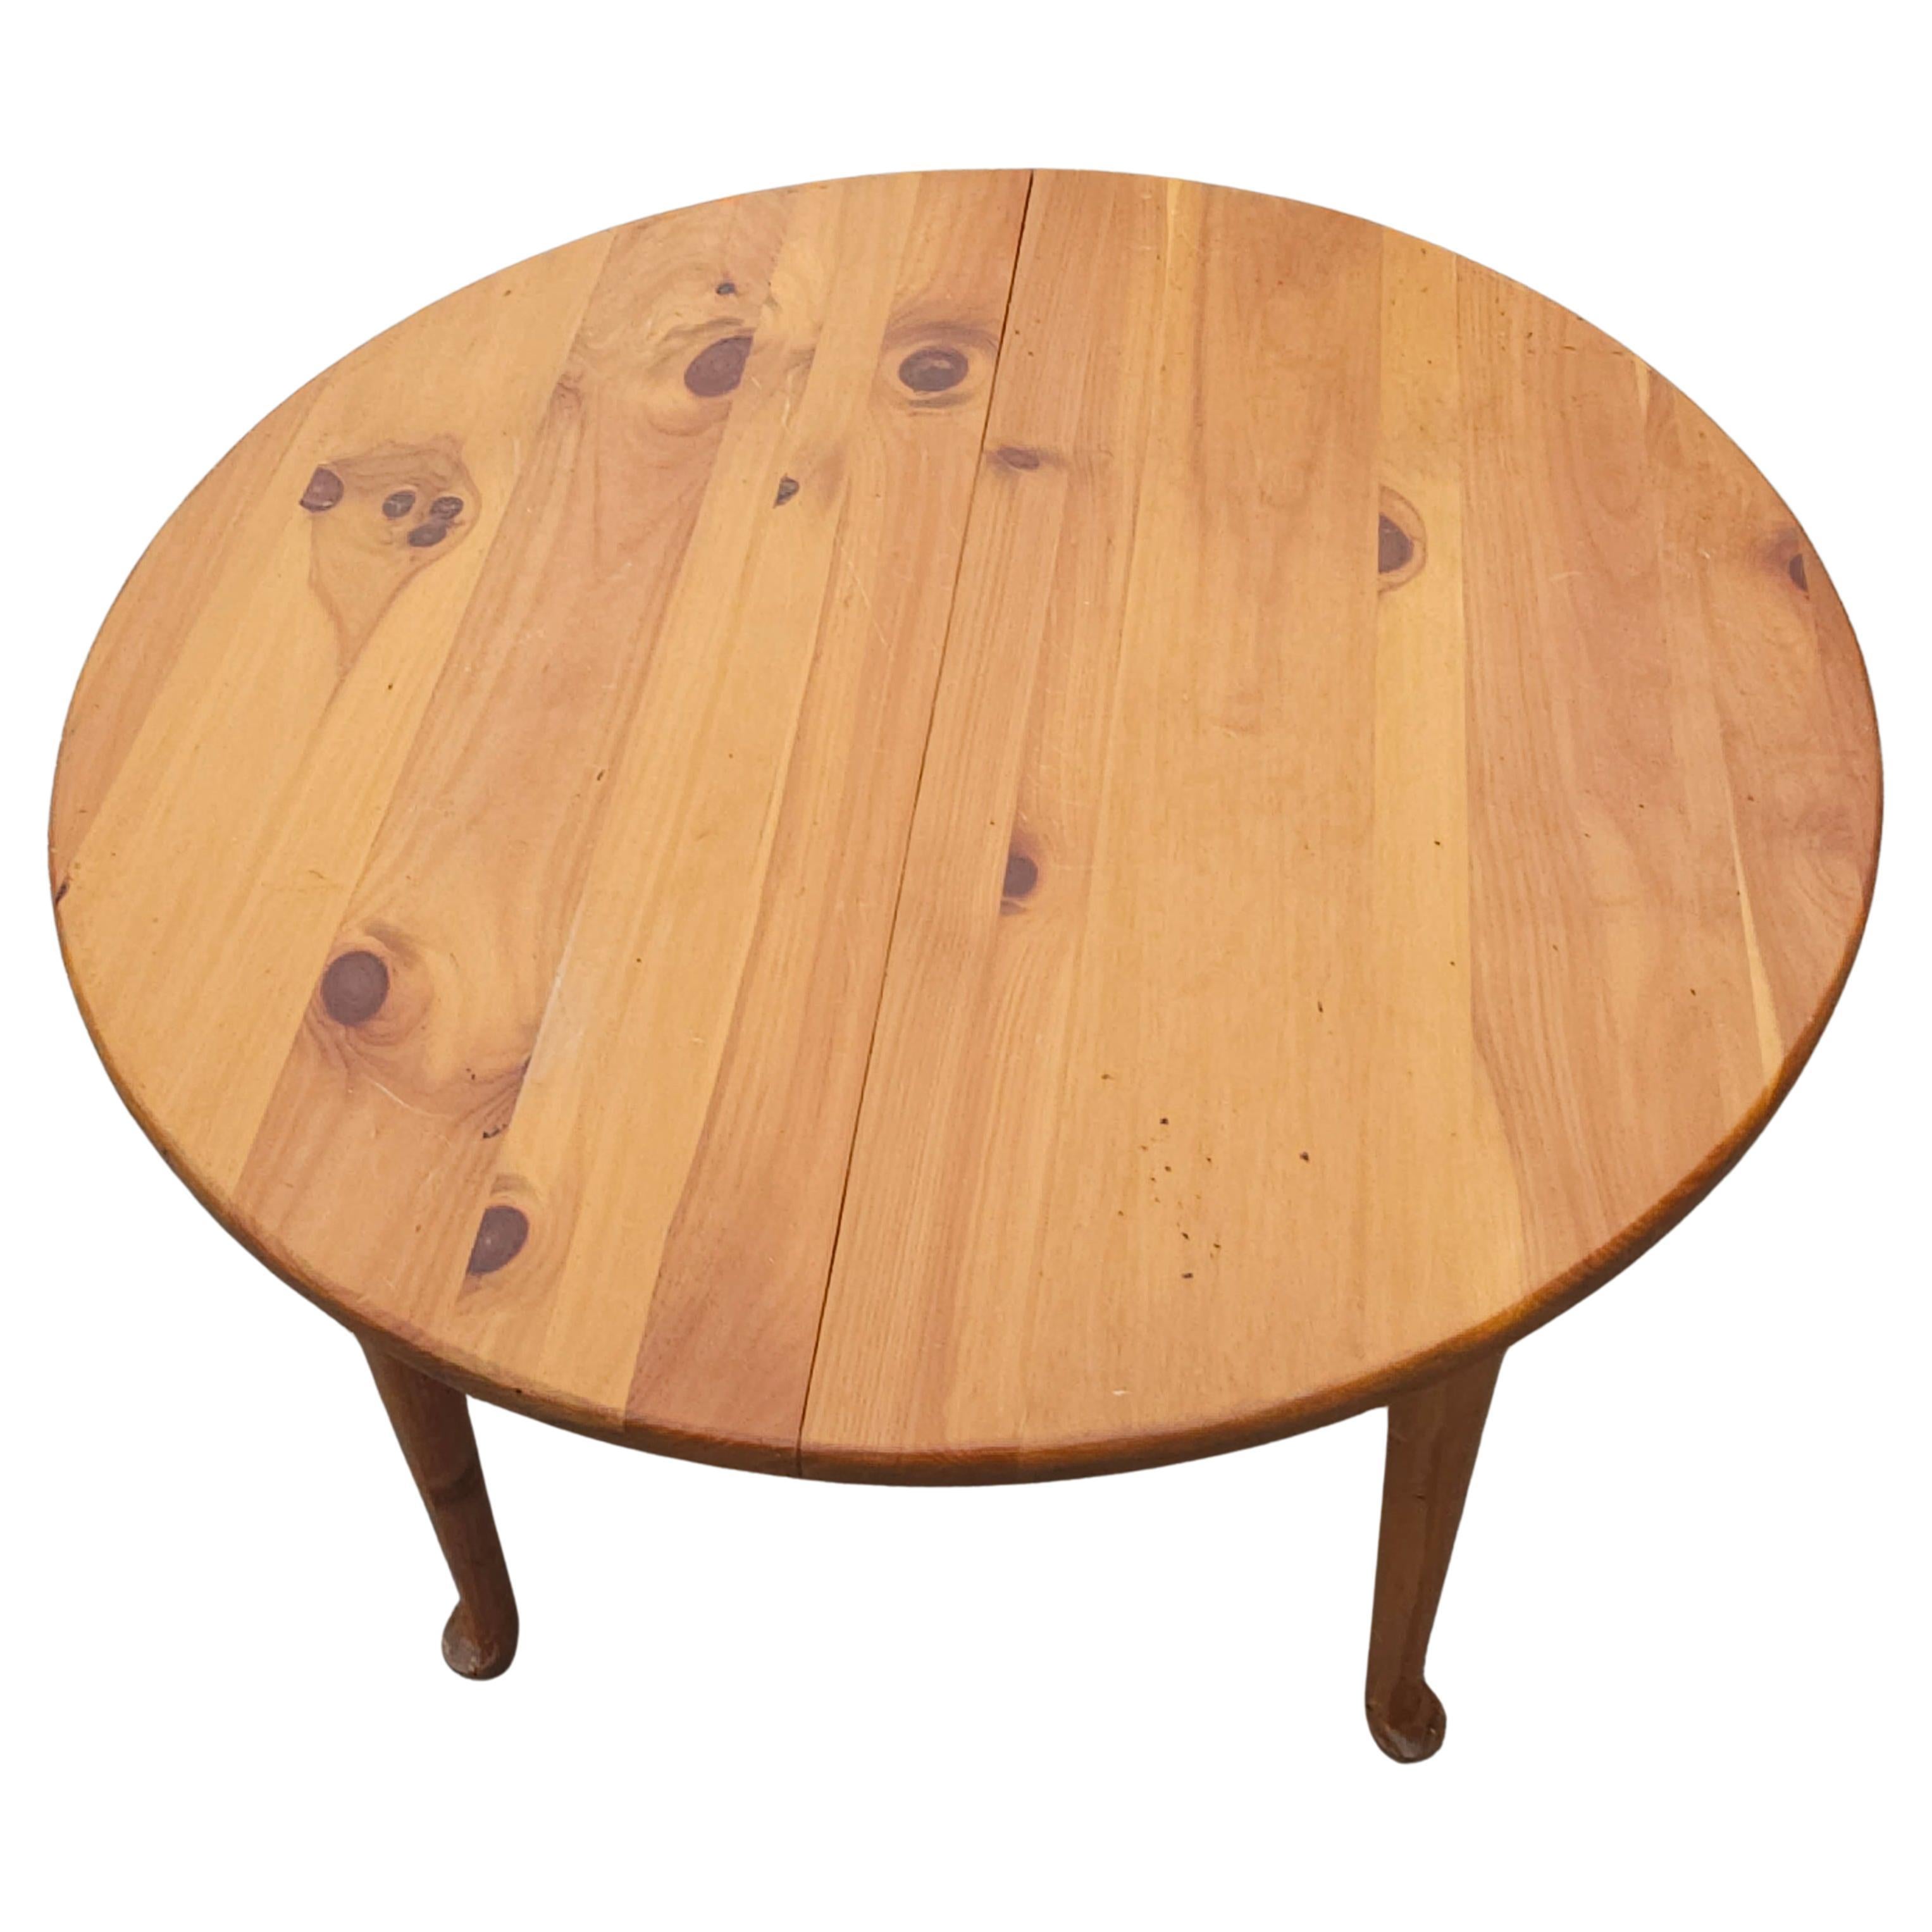 A Mid Century American Pine Extension Breakfast Table with Queen Anne feet. Measures 42